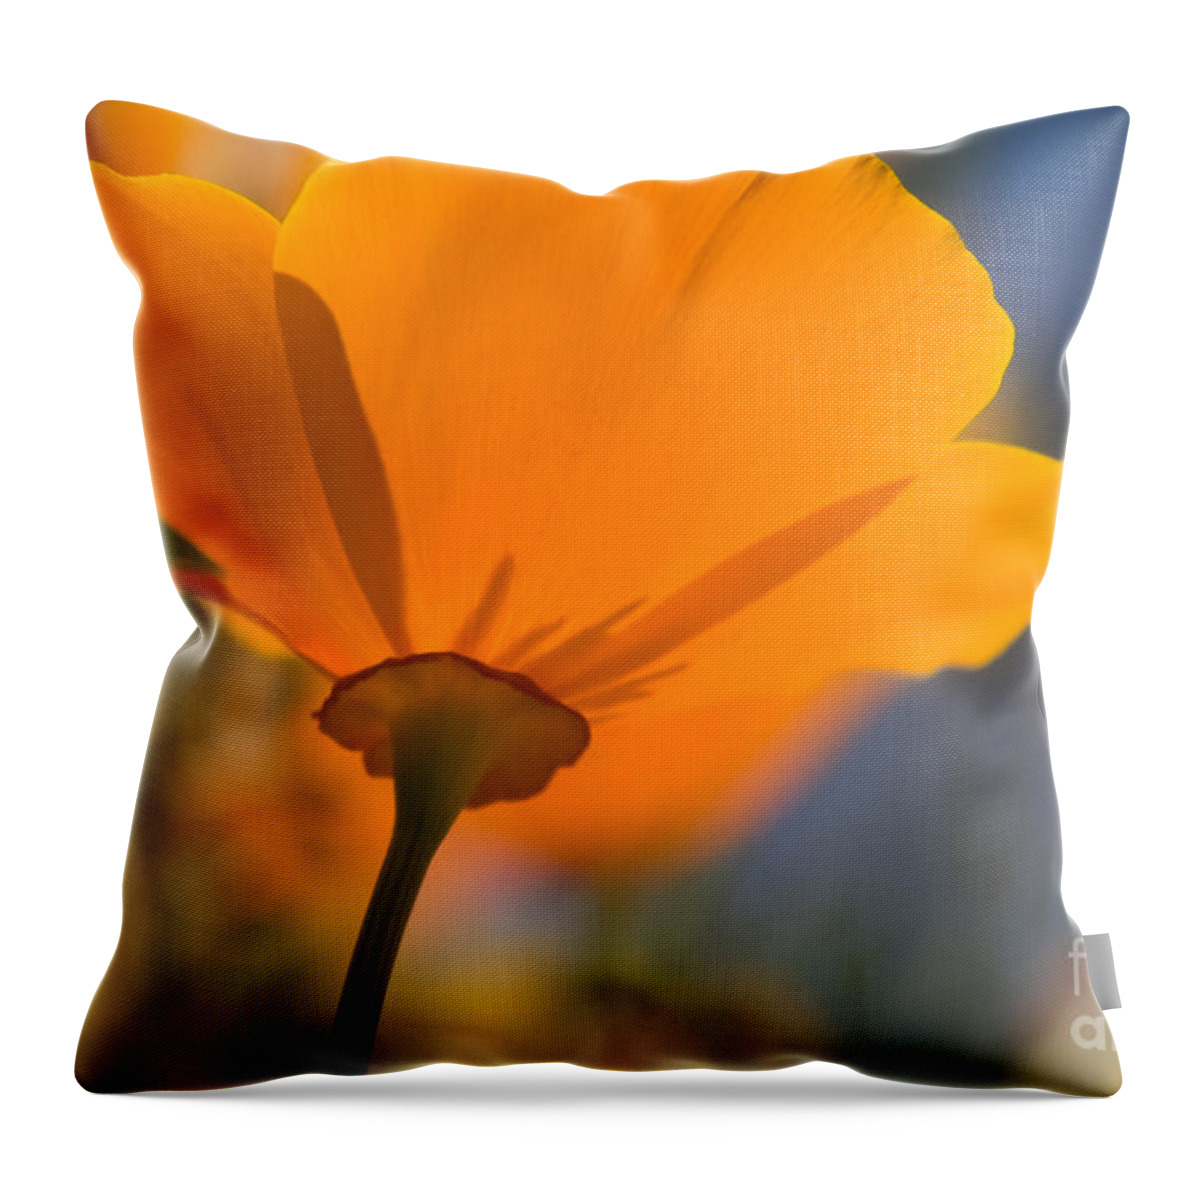 Poppies Throw Pillow featuring the photograph California Poppy by Chris Scroggins